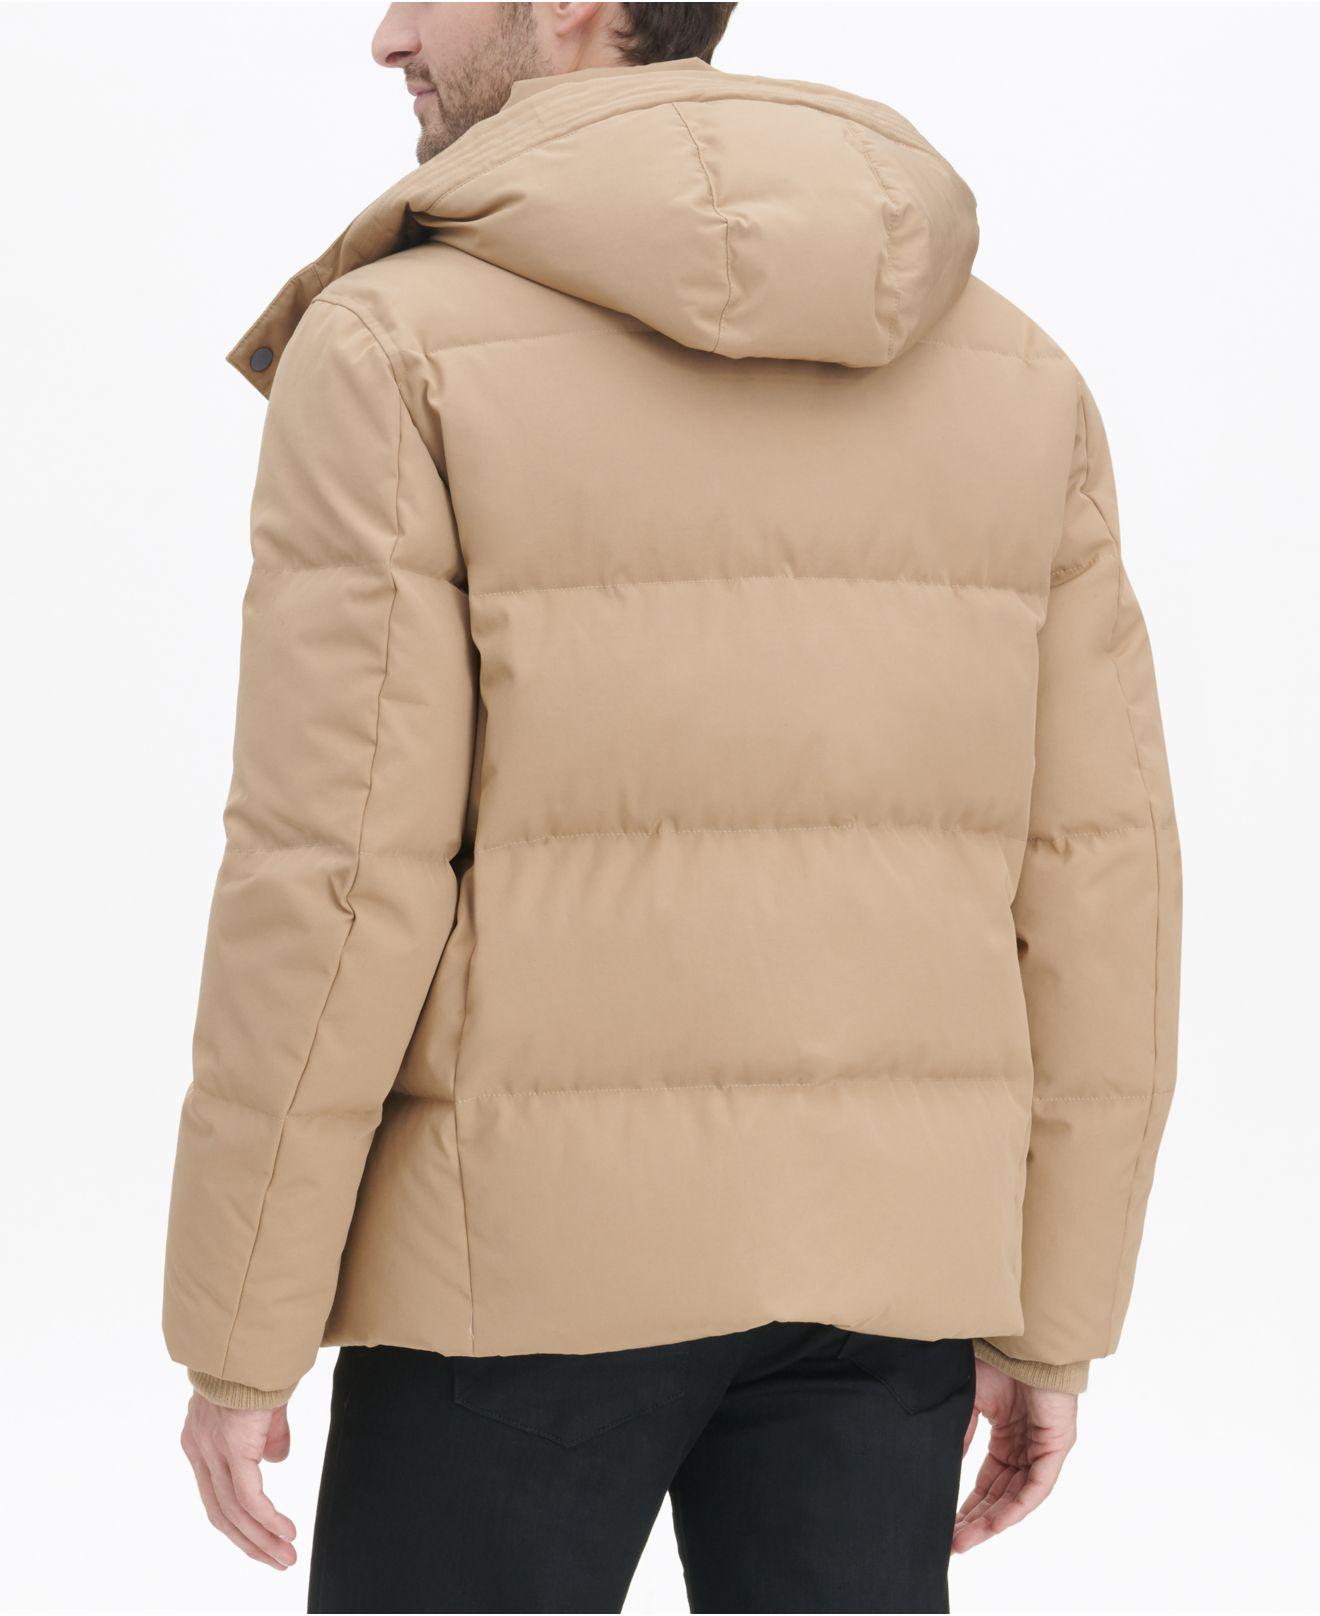 Cole Haan Kenny Puffer Parka Jacket in Natural for Men - Lyst